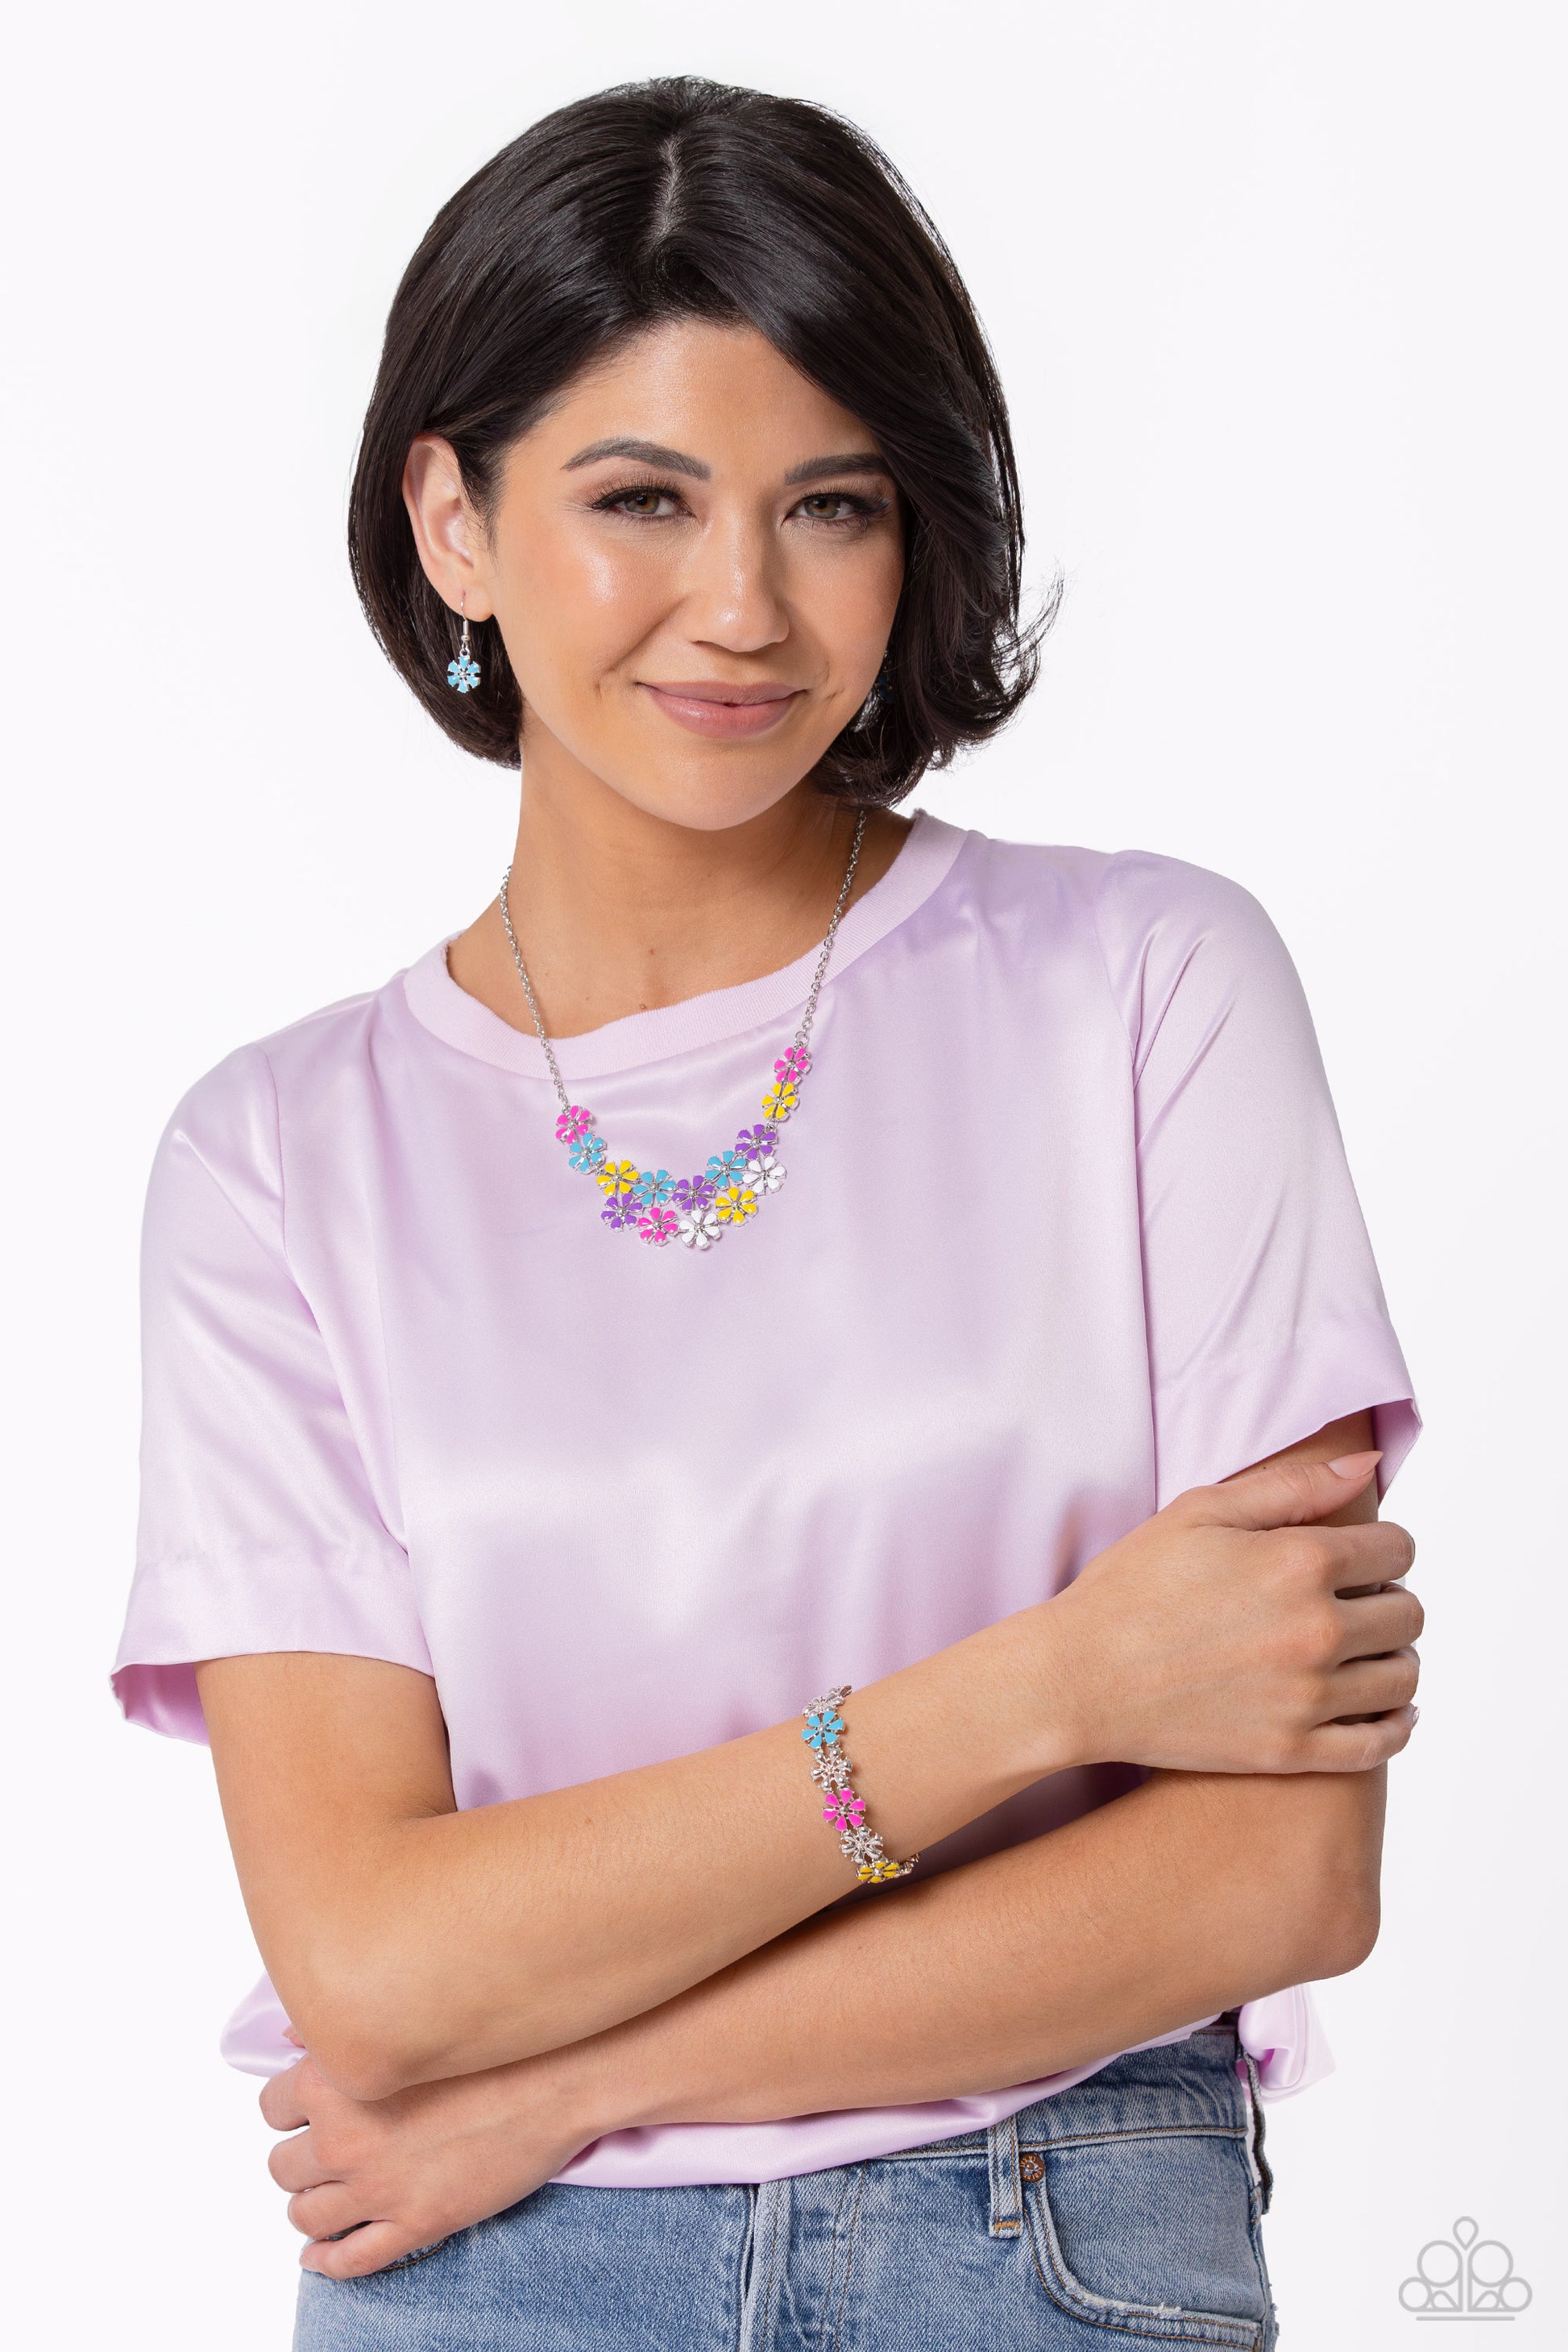 Paparazzi Accessories Floral Fair - Multi Painted in vivacious shades of hot pink, turquoise, yellow, purple, and white, a collection of silver studded flowers alternating with high-sheen silver flowers glides across the wrist from an elastic stretchy ban